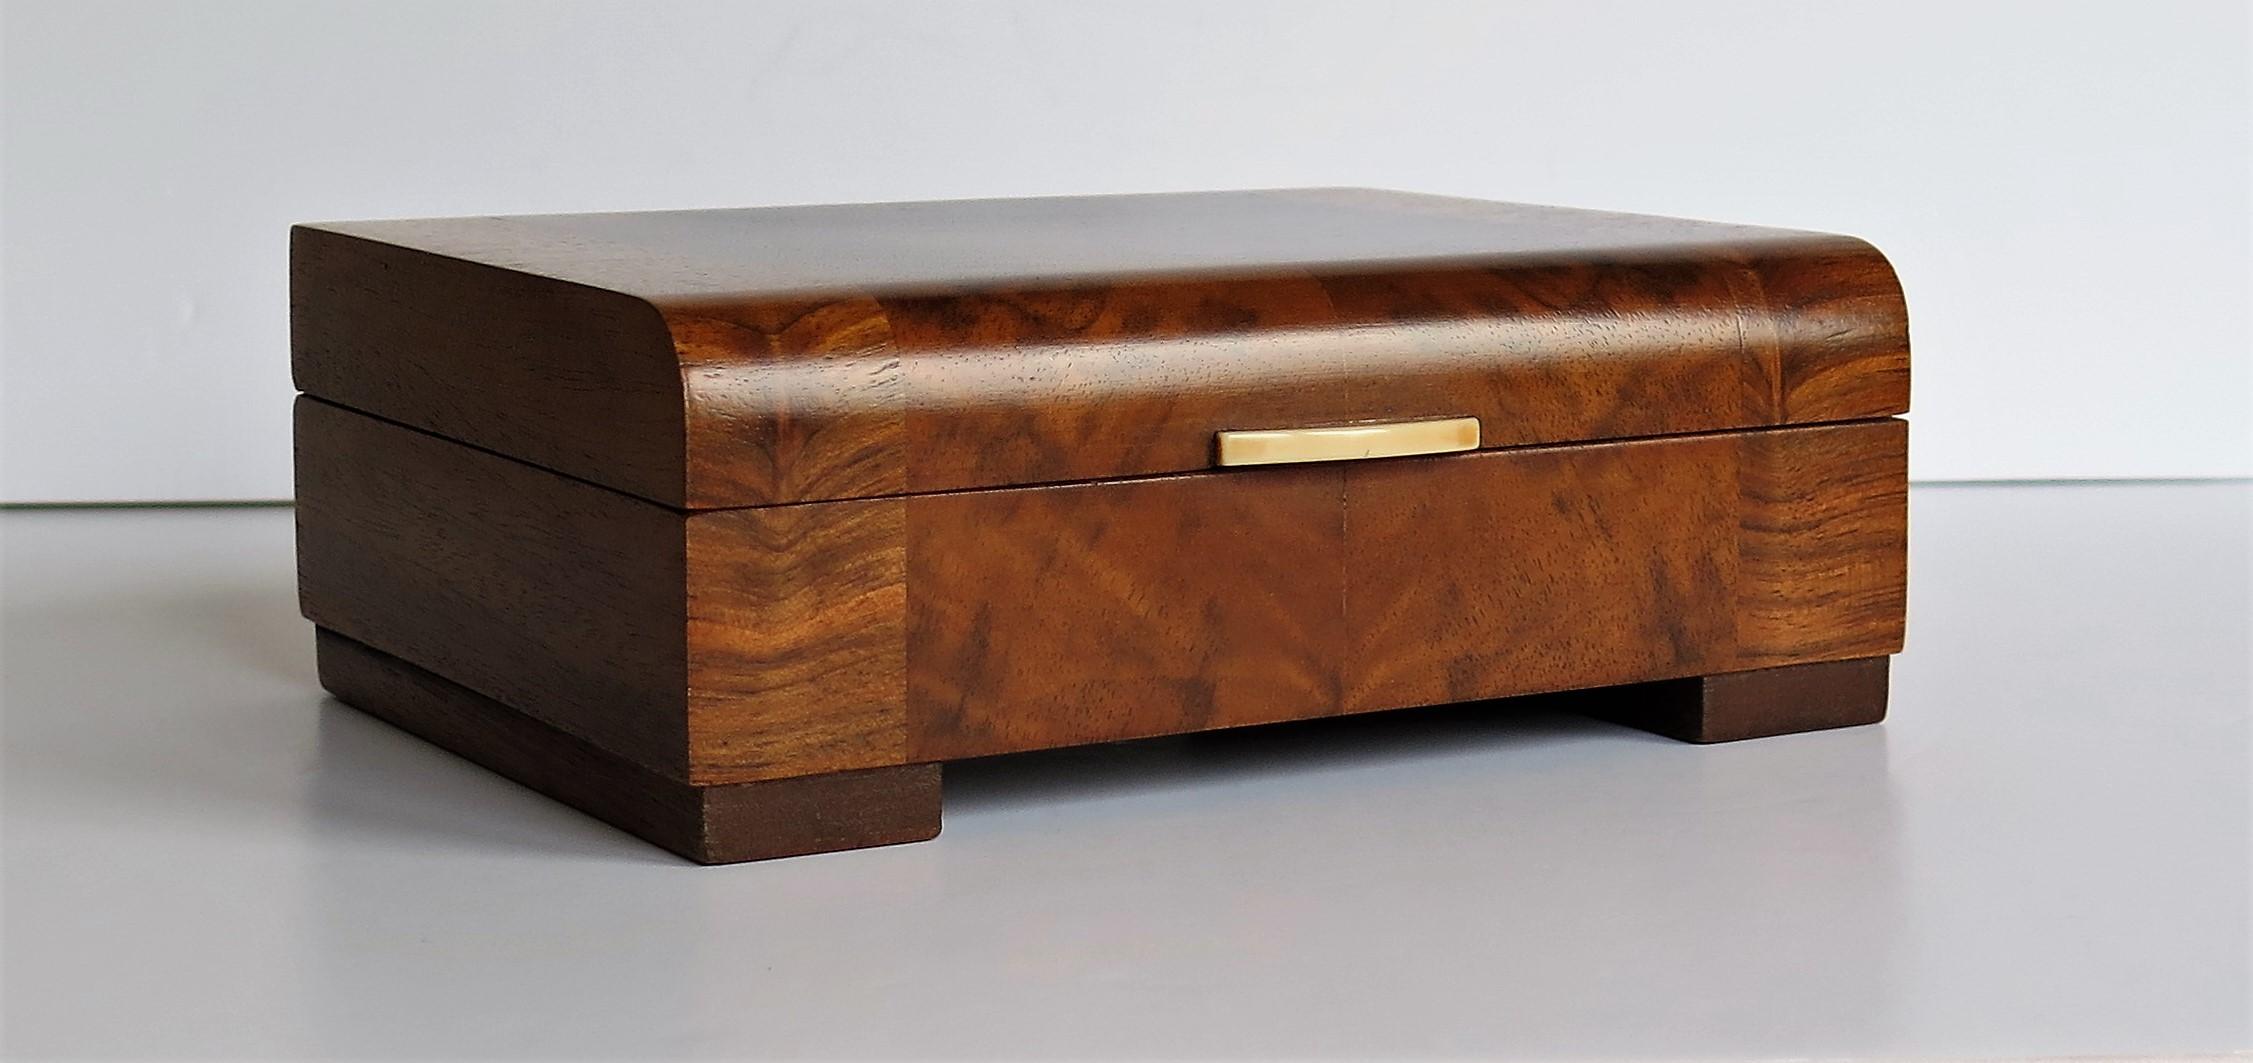 English Art Deco Lidded Box Mahogany and Burr Walnut with Two Compartments, circa 1925